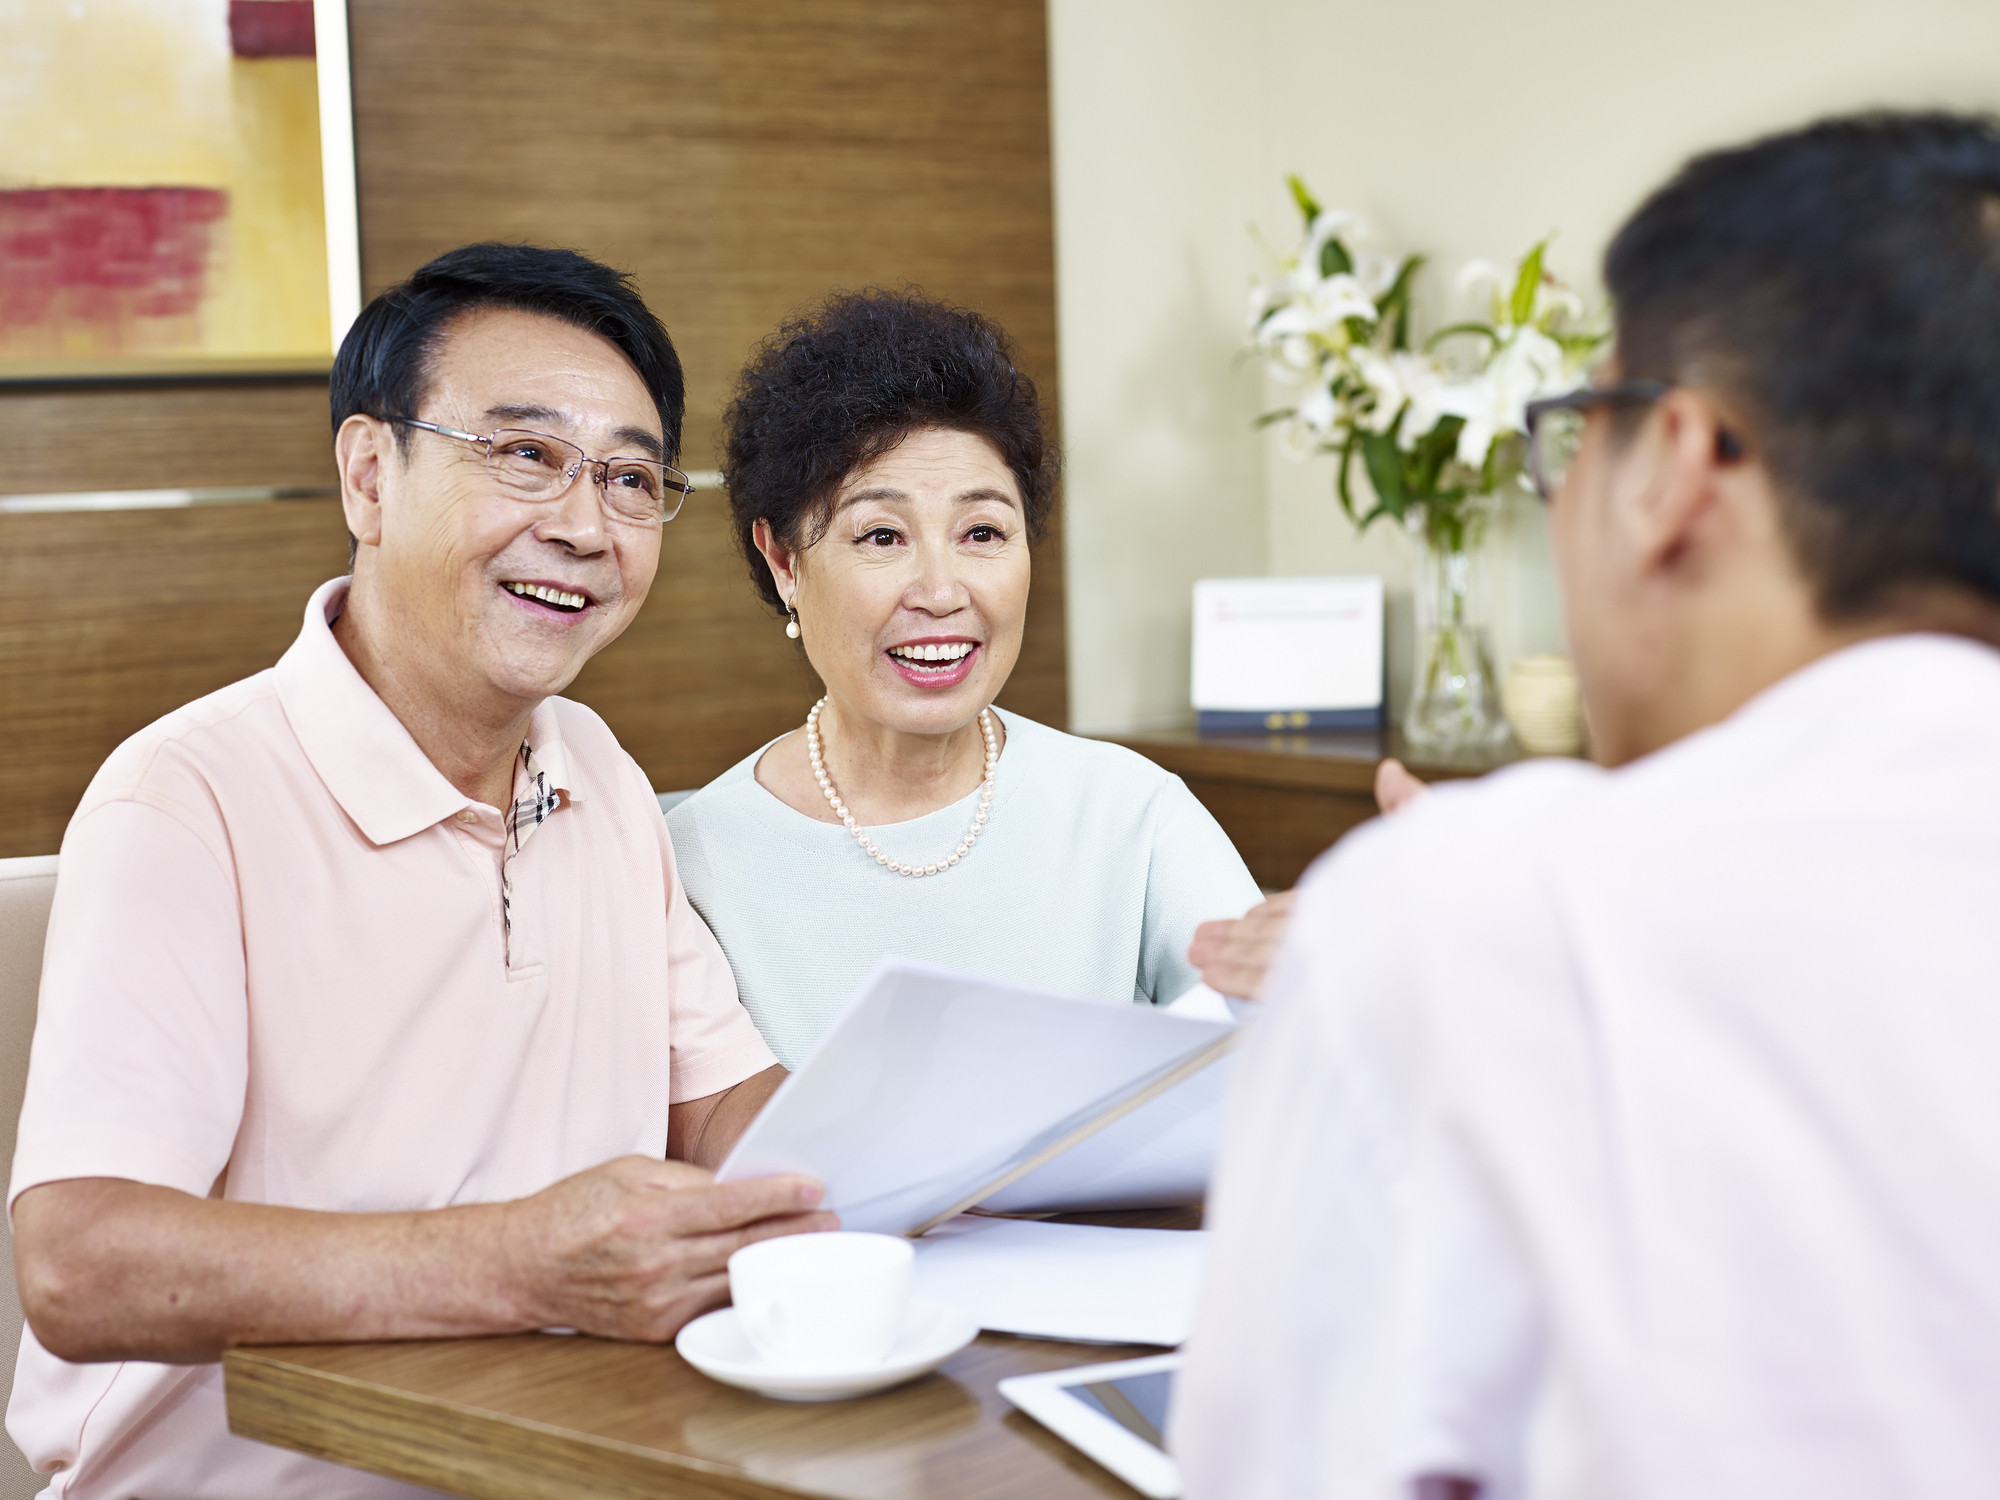 Stock Image of Senior Asian Couple Meeting with Realtor Who Is Showing Them a Piece of Paper